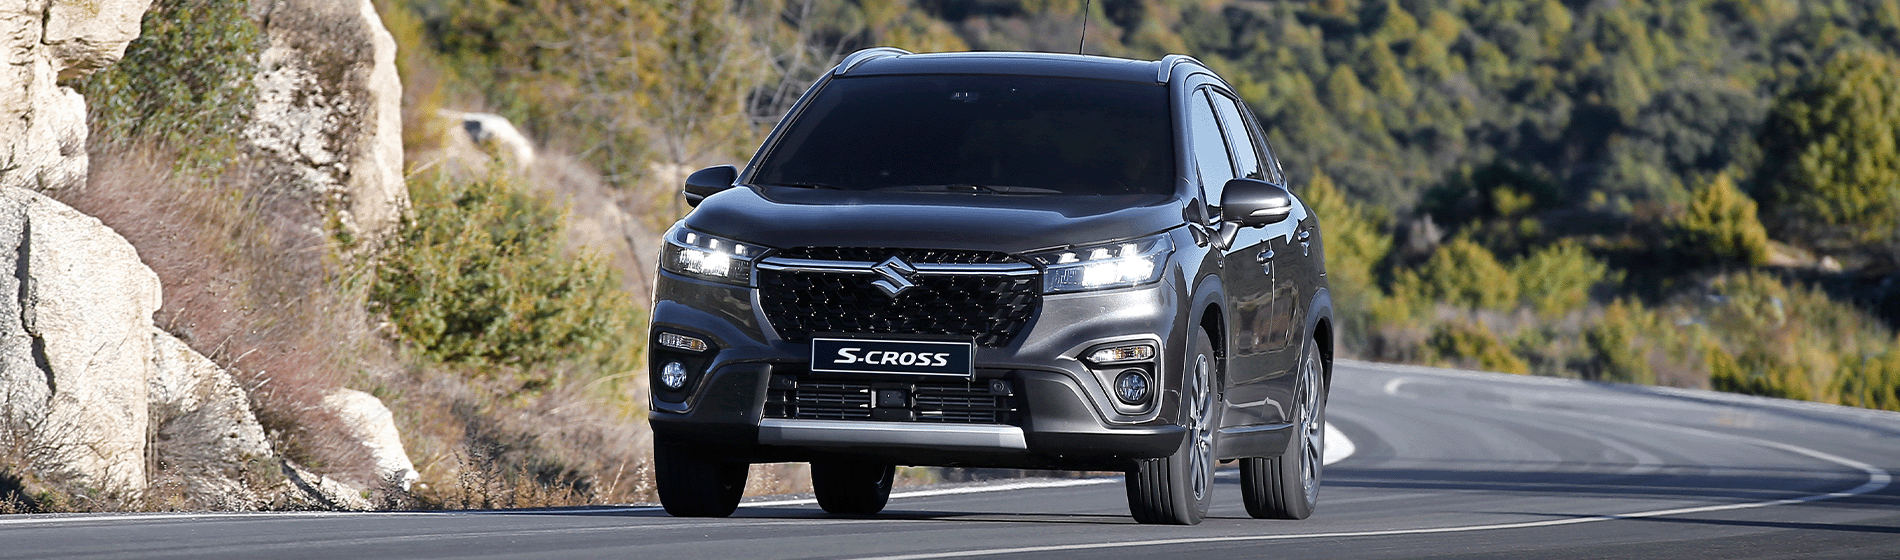 THE ALL-NEW S-CROSS